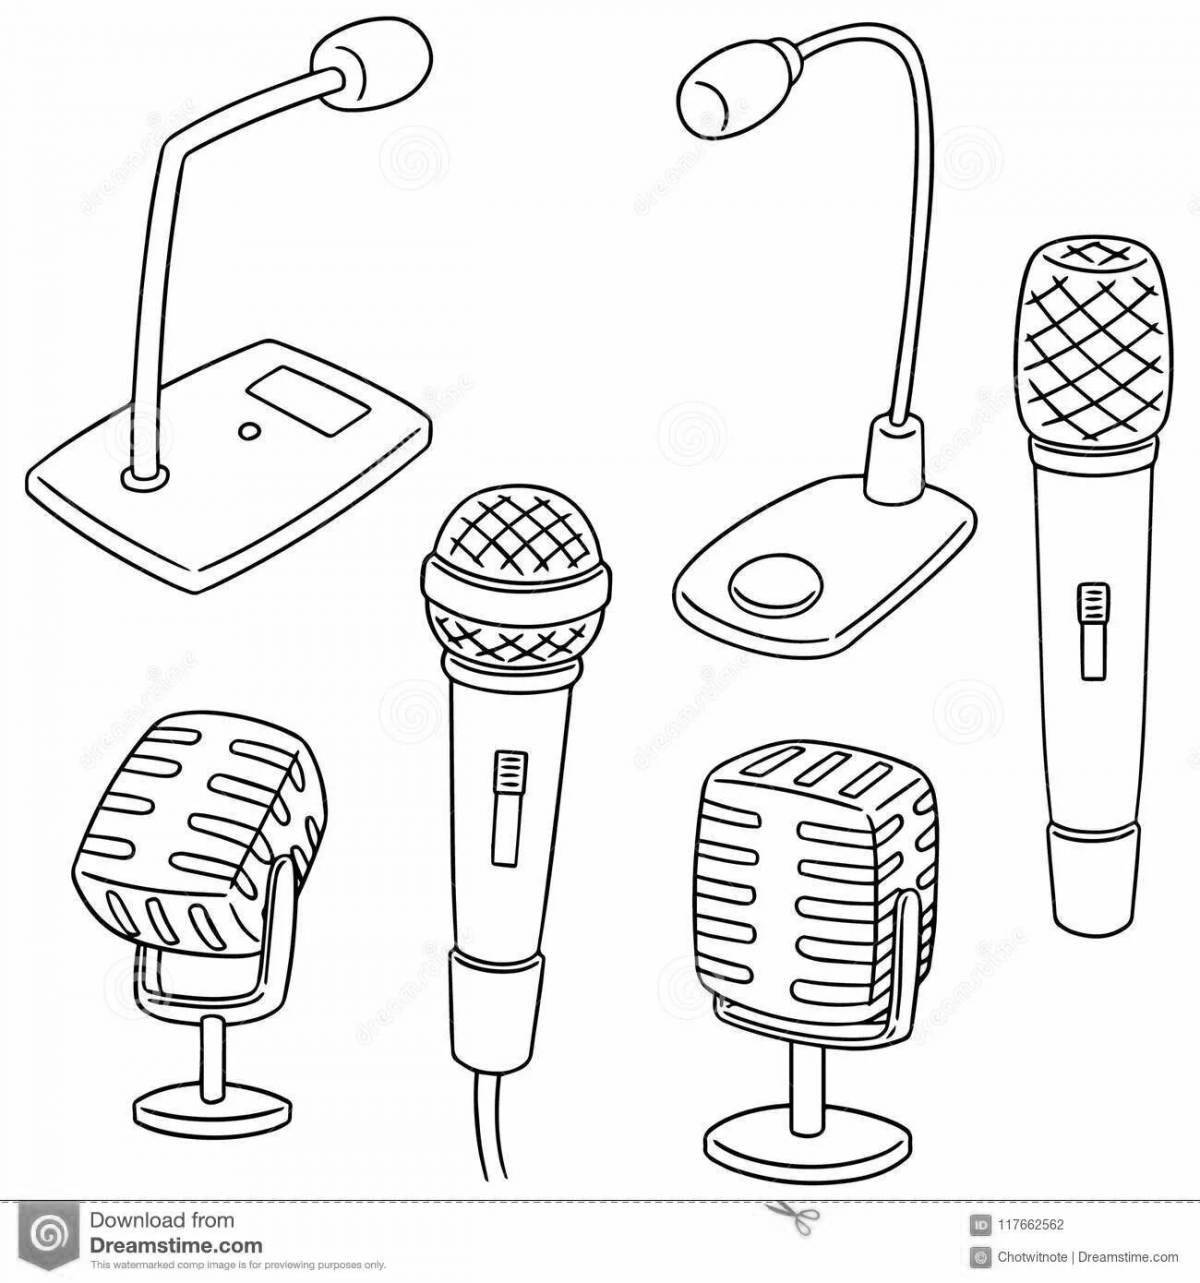 Outstanding microphone coloring page for kids